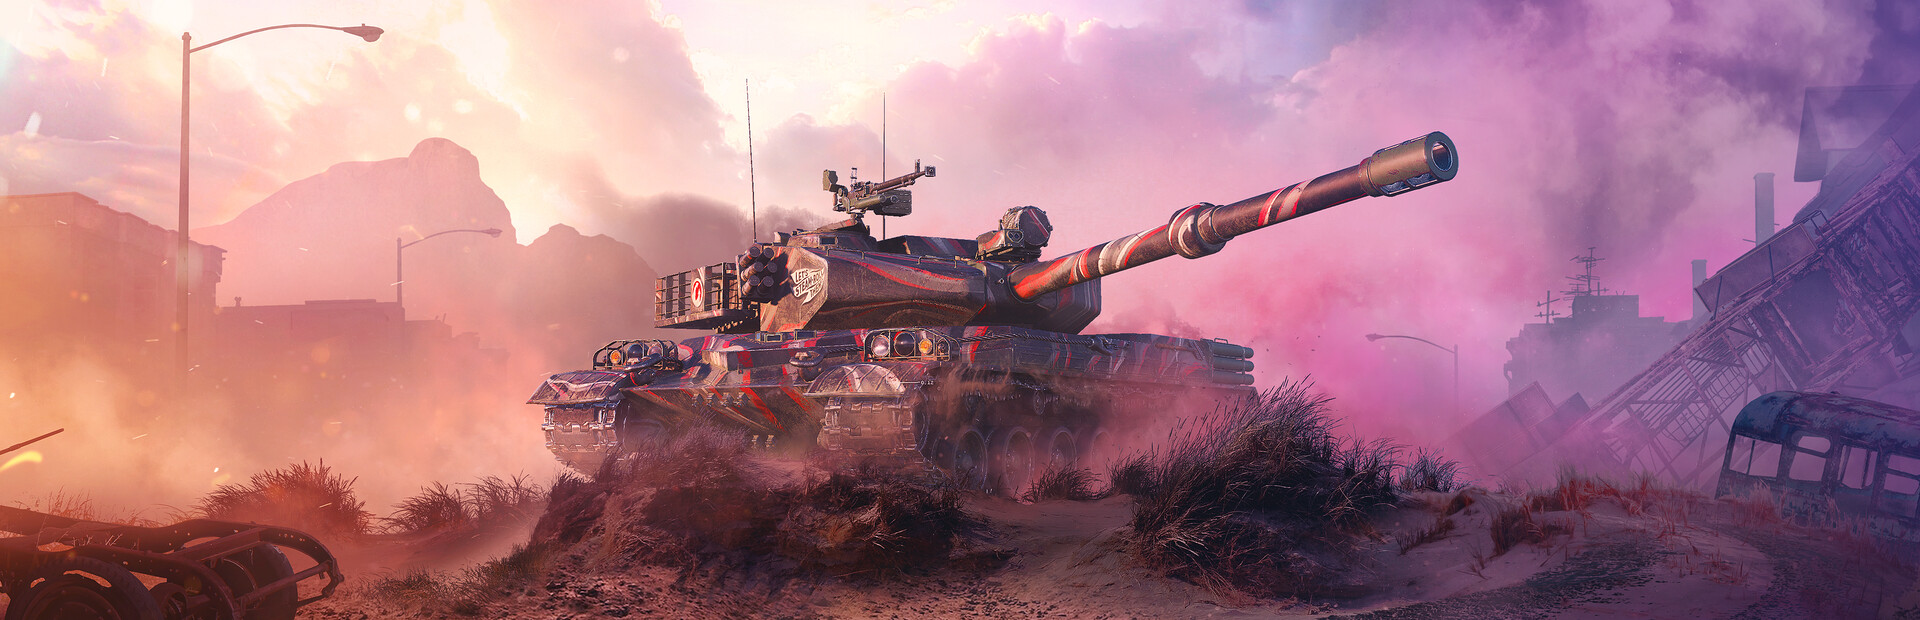 World of Tanks cover image